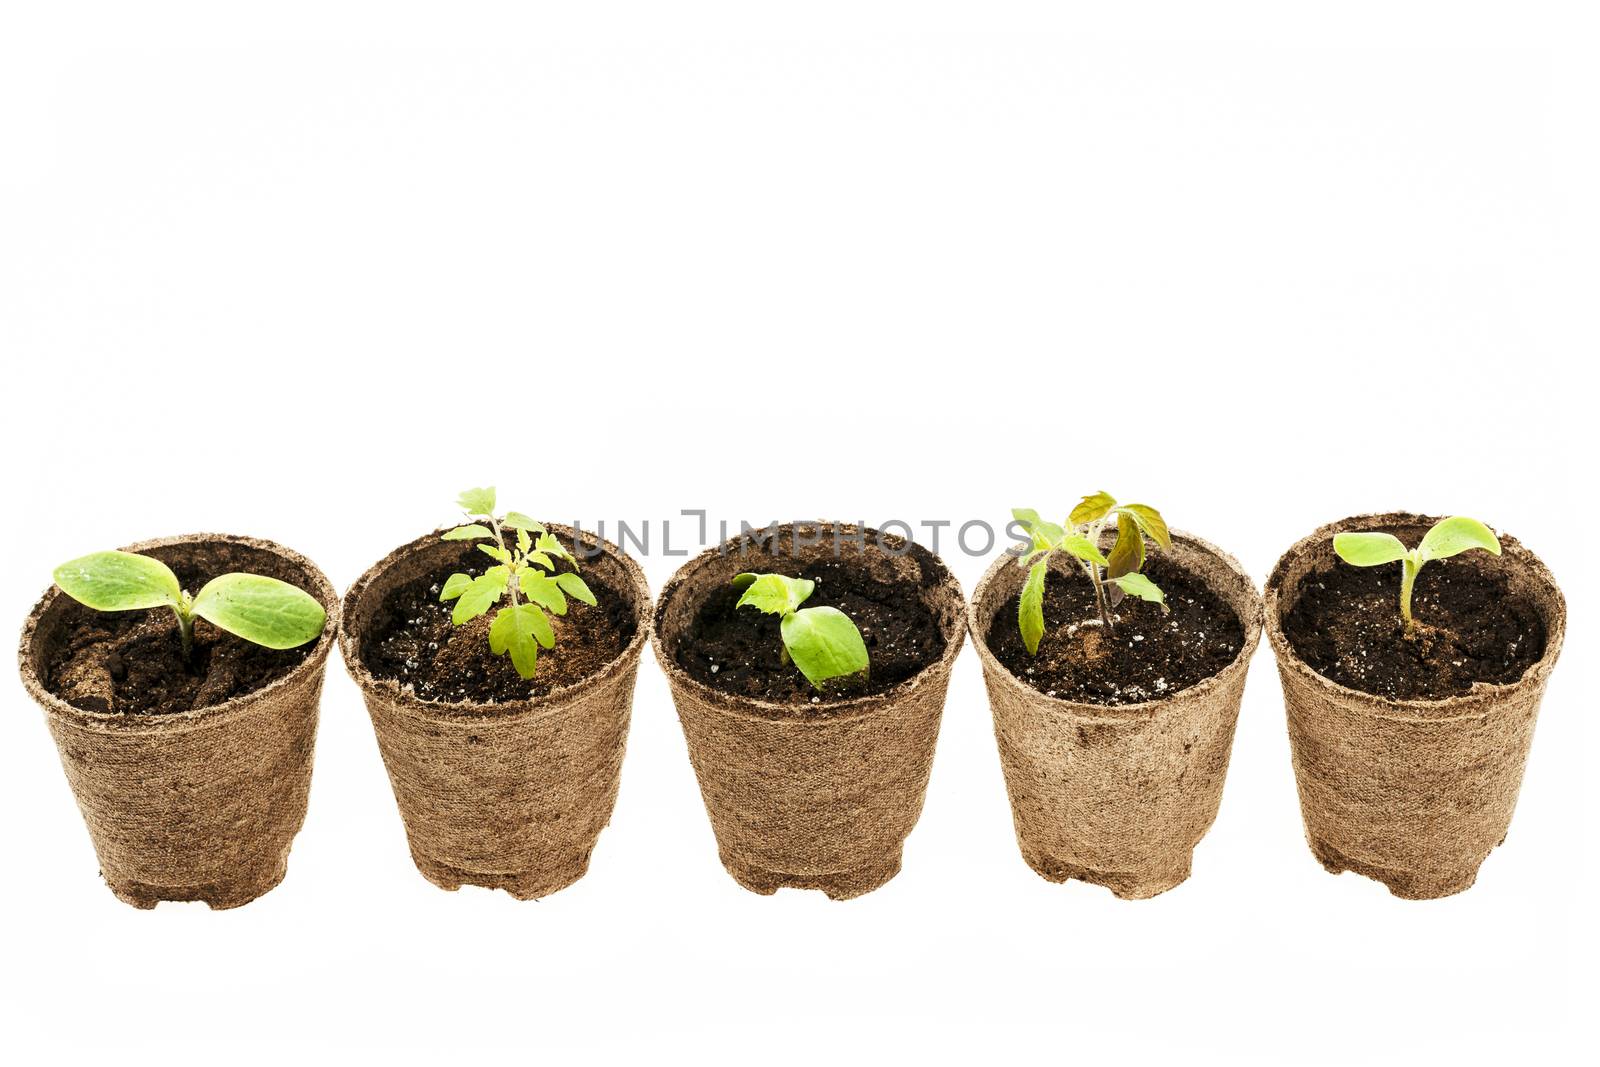 Row of potted seedlings growing in biodegradable peat moss pots isolated on white background